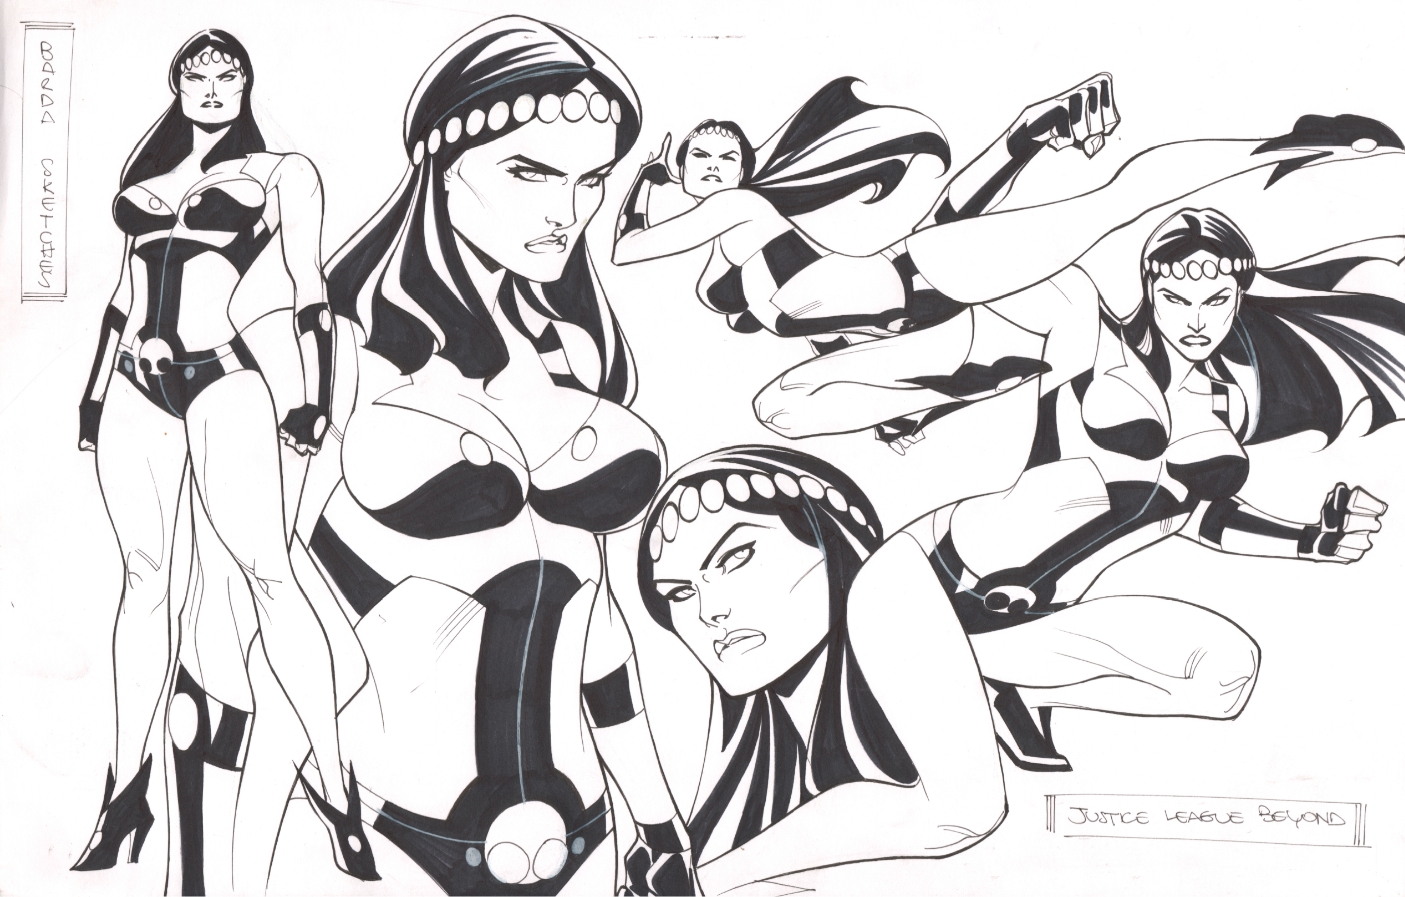 Big Barda Justice League Beyond characters design - Thony Silas, in Ivan  Costa's DC Comics Comic Art Gallery Room